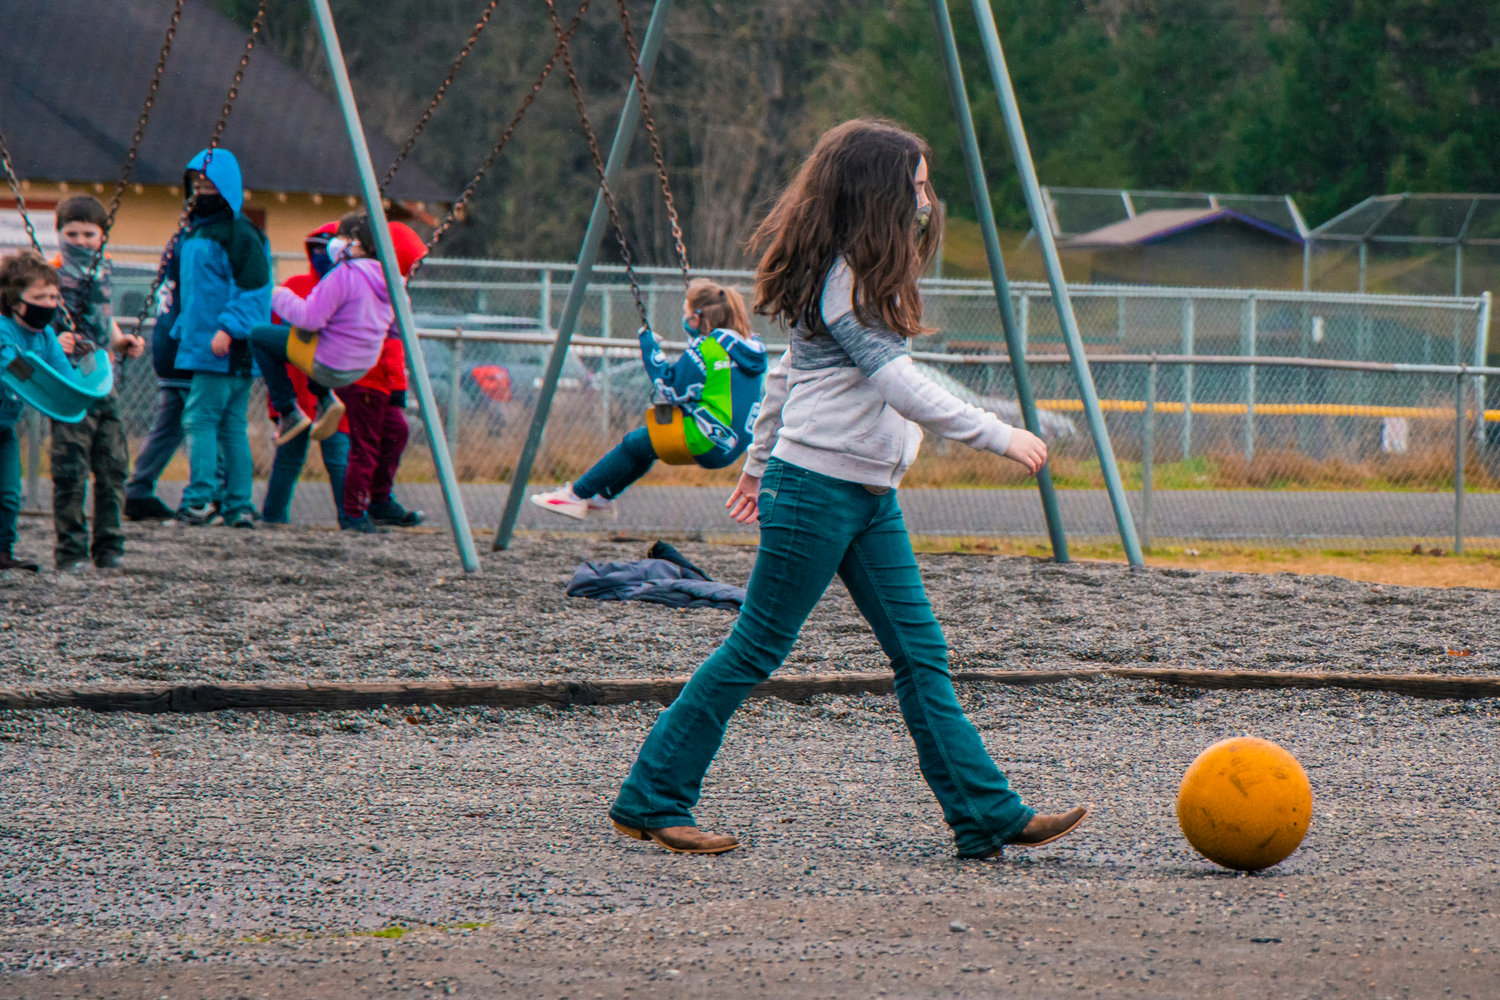 Students play during recess in Onalaska on Tuesday.